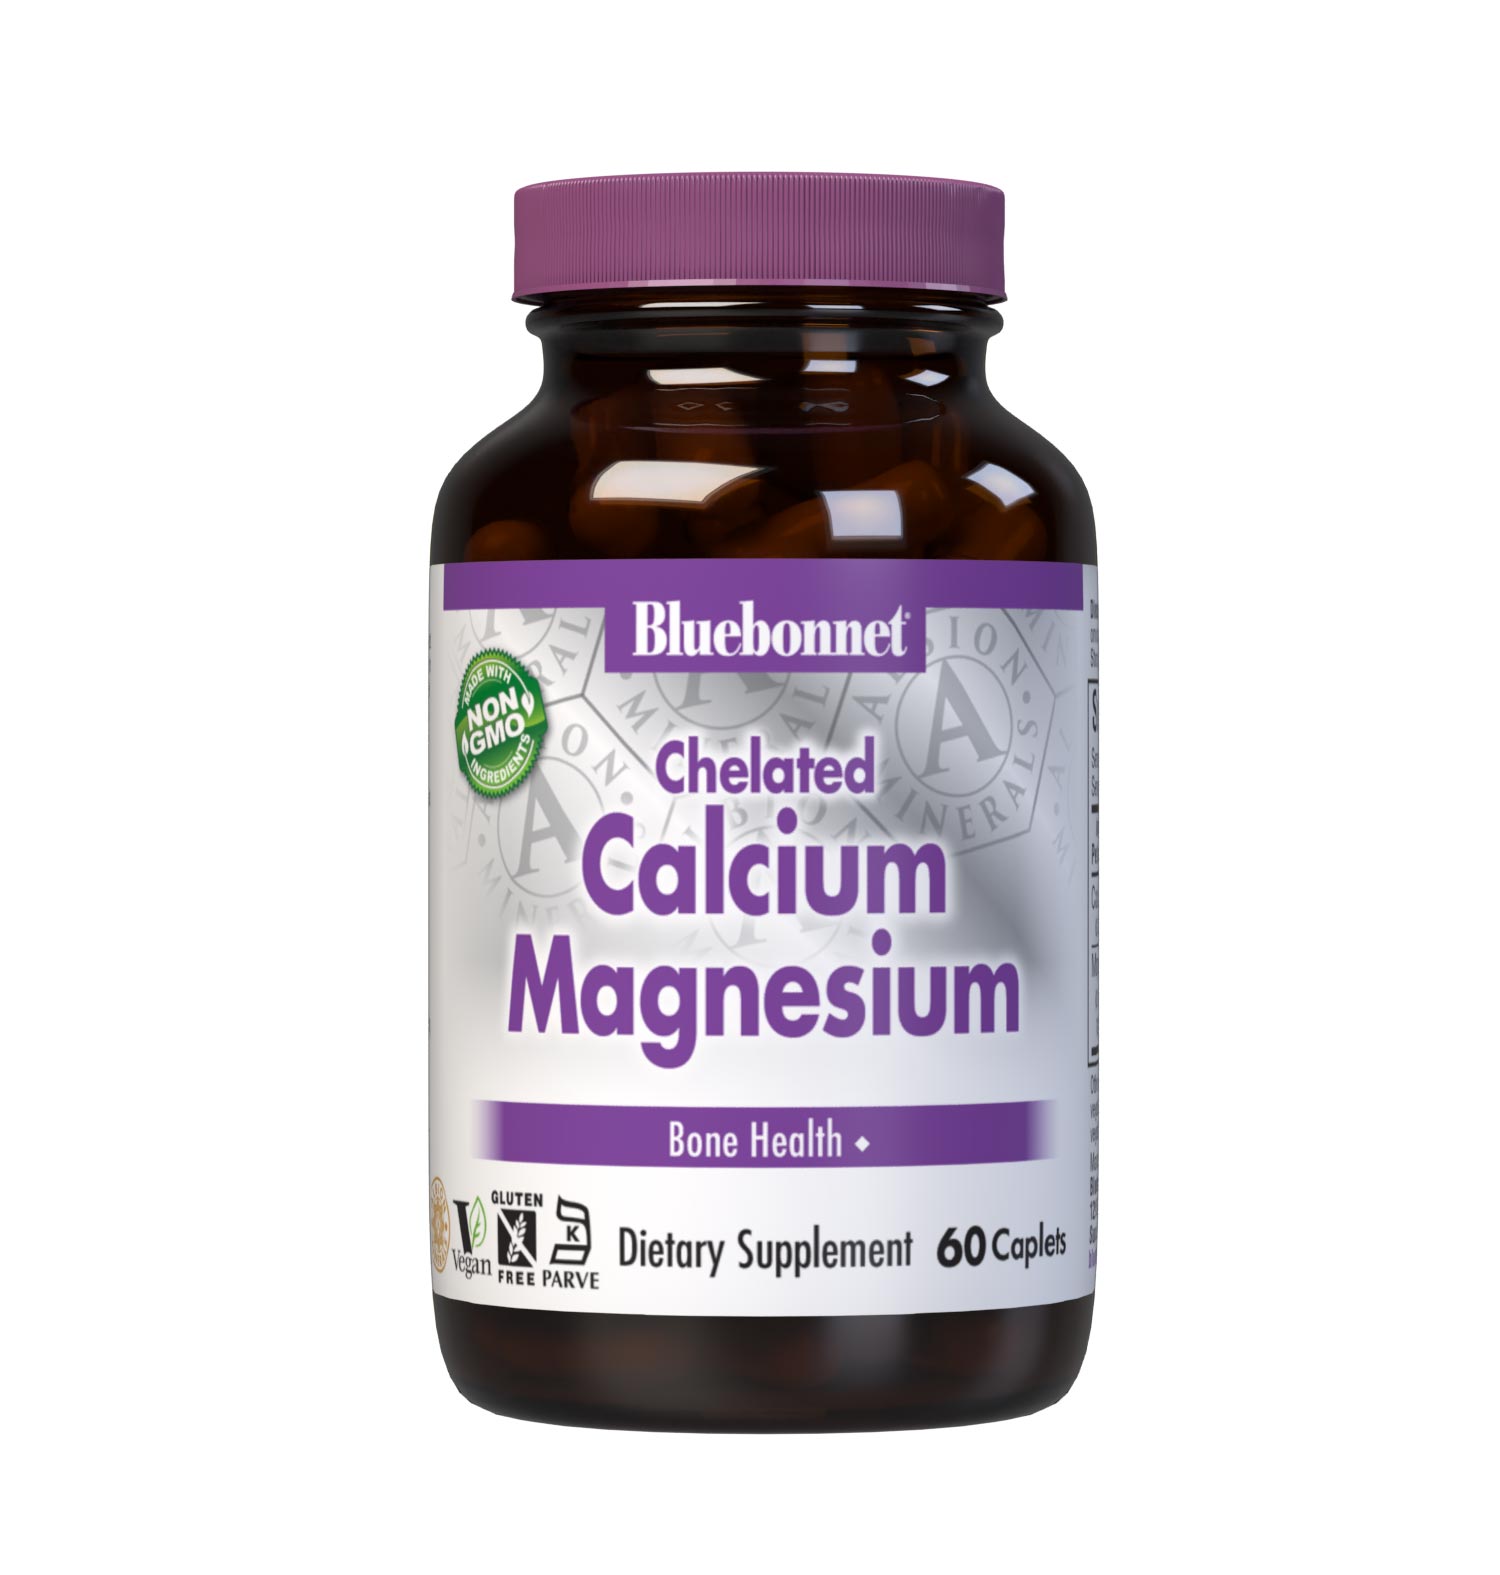 Bluebonnet's Chelated Calcium Magnesium 60 Caplets are formulated with 500 mg of elemental calcium from fully reacted calcium bisglycinate and 200 mg of elemental magnesium from magnesium glycinate chelate buffered with magnesium oxide from Albion for strong healthy bones. Buffered magnesium increases the pH (alkalinity) of the formula, making it more gentle on the digestive tract and easier to absorb. #size_60 count